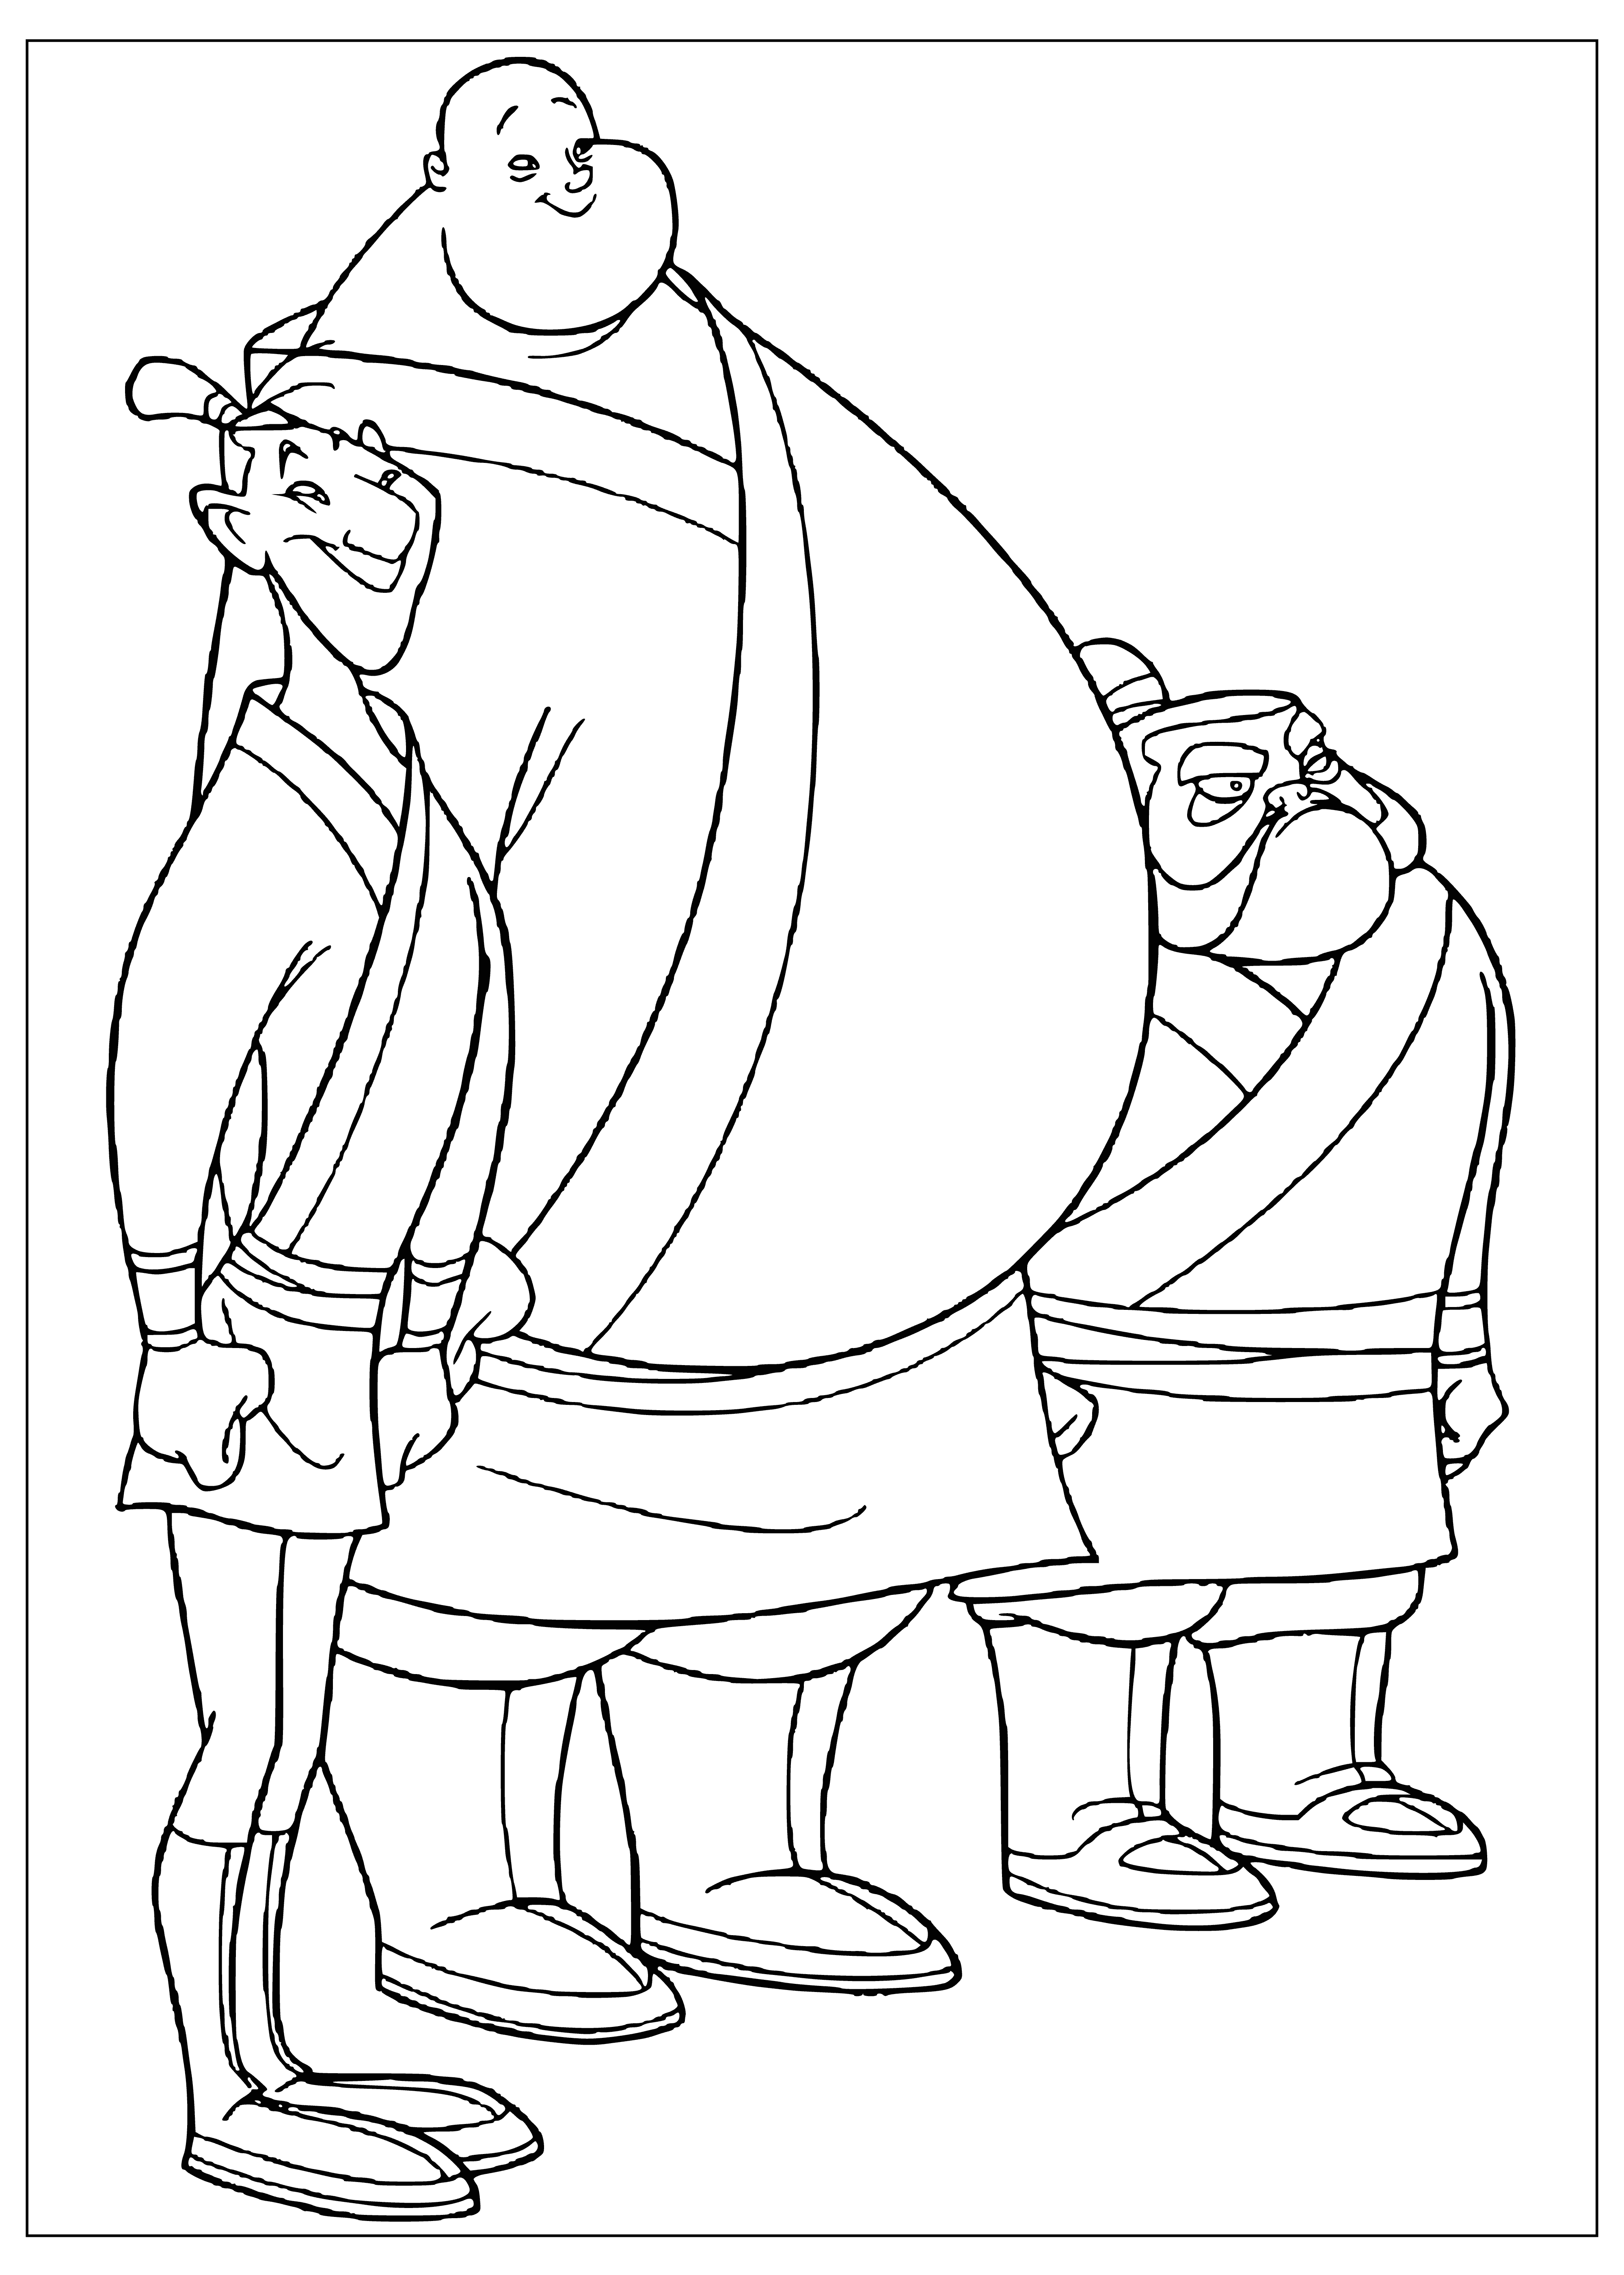 Soldiers Ling, Chien-Po, and Yao are friends of Mulan coloring page